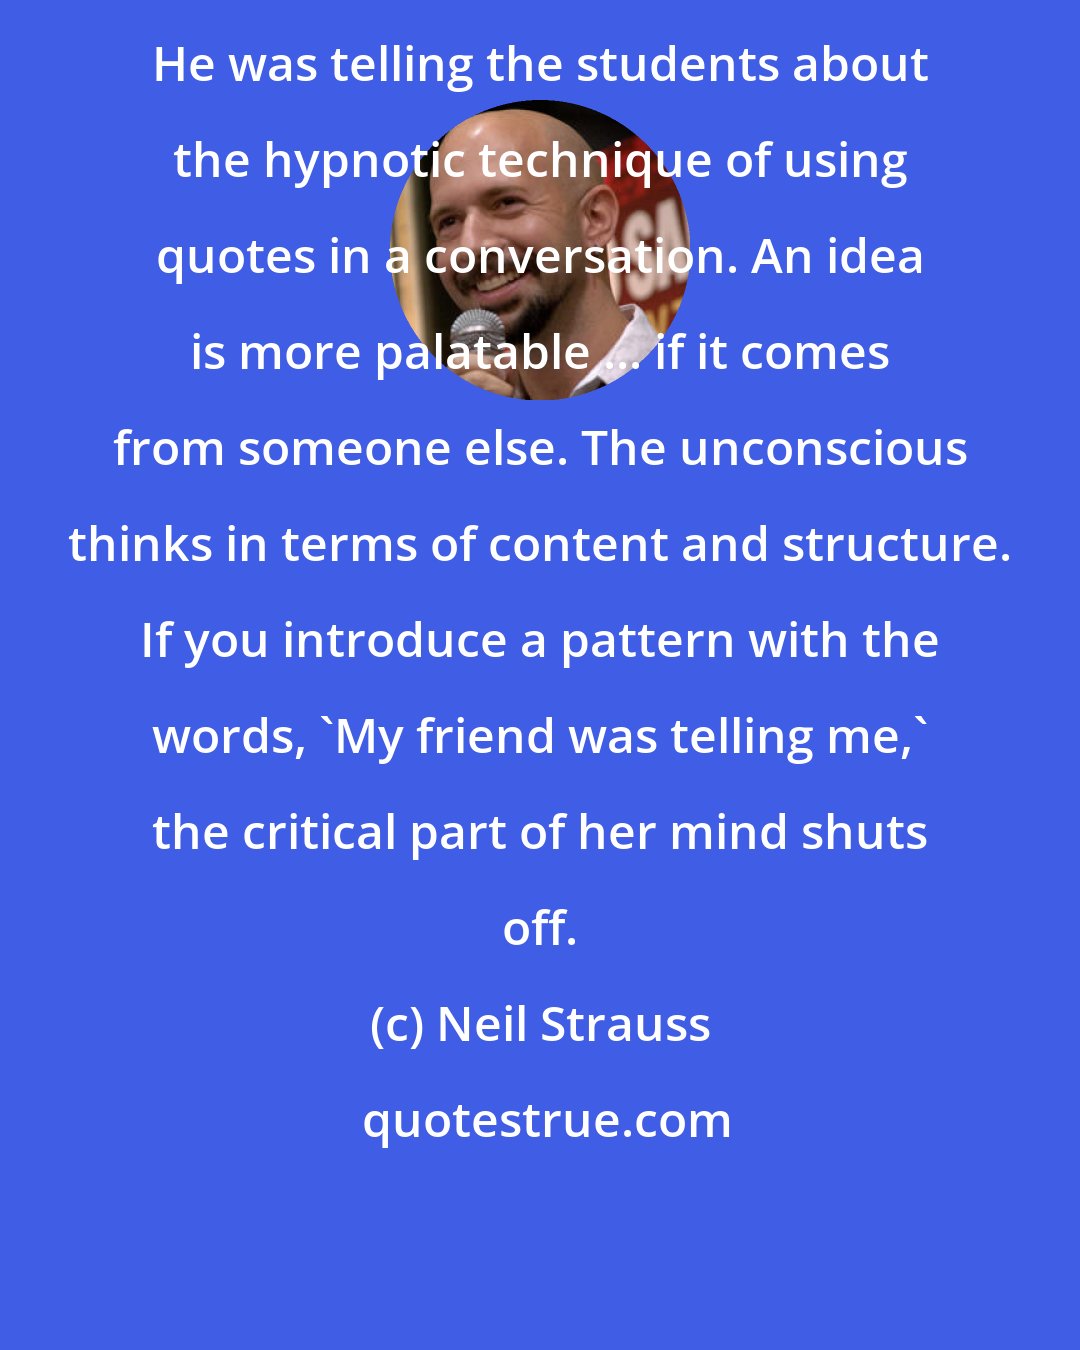 Neil Strauss: He was telling the students about the hypnotic technique of using quotes in a conversation. An idea is more palatable ... if it comes from someone else. The unconscious thinks in terms of content and structure. If you introduce a pattern with the words, 'My friend was telling me,' the critical part of her mind shuts off.